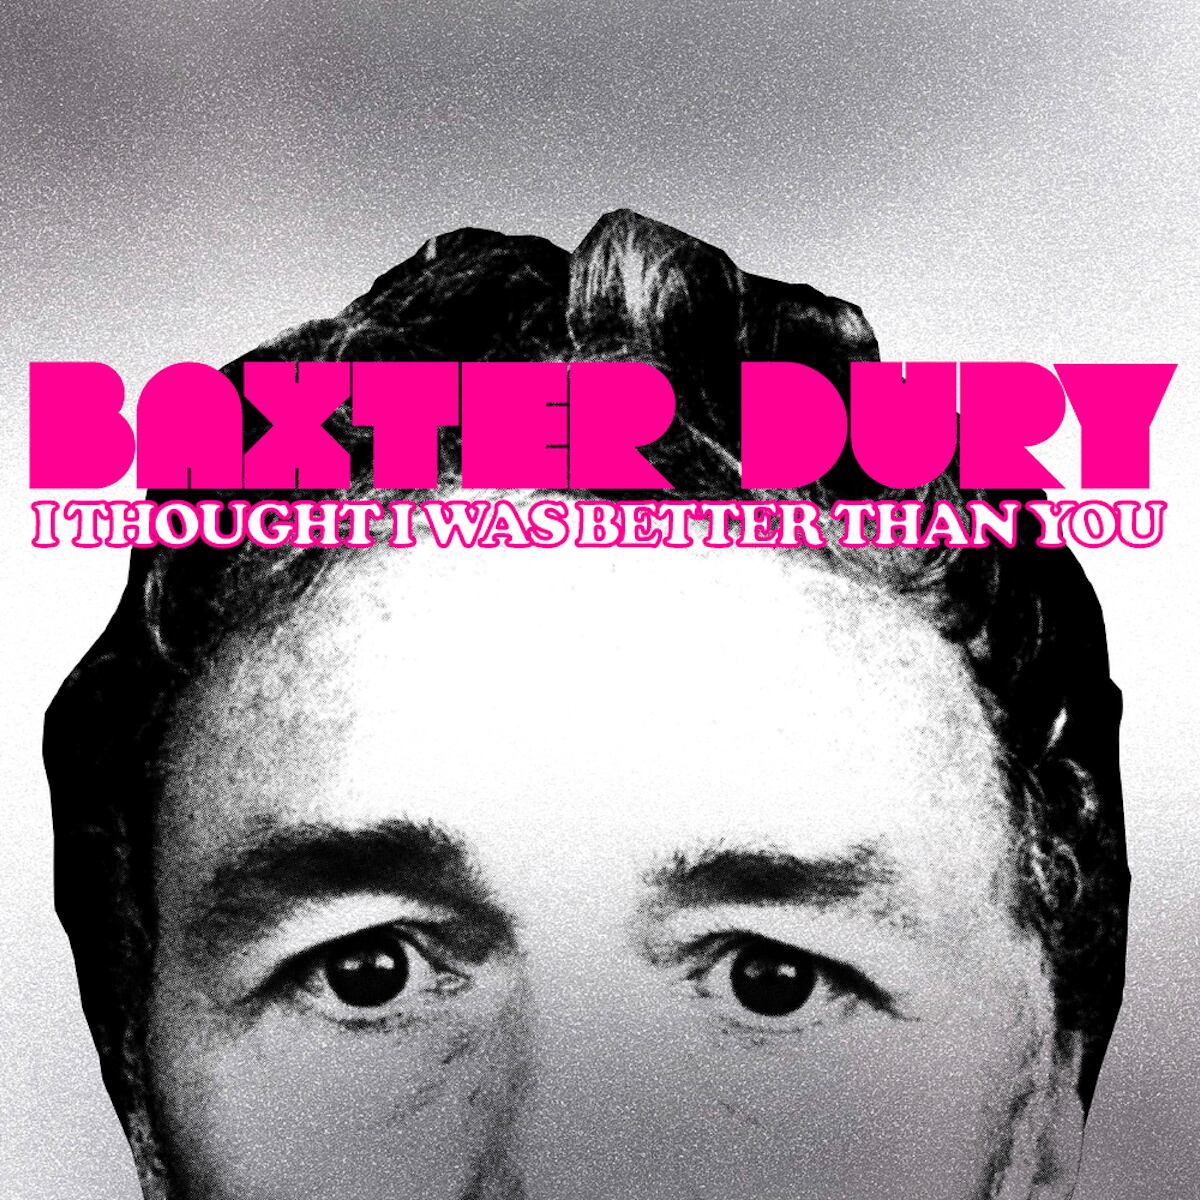 Cover of 'I Thought I Was Better Than You', by Baxter Dury.